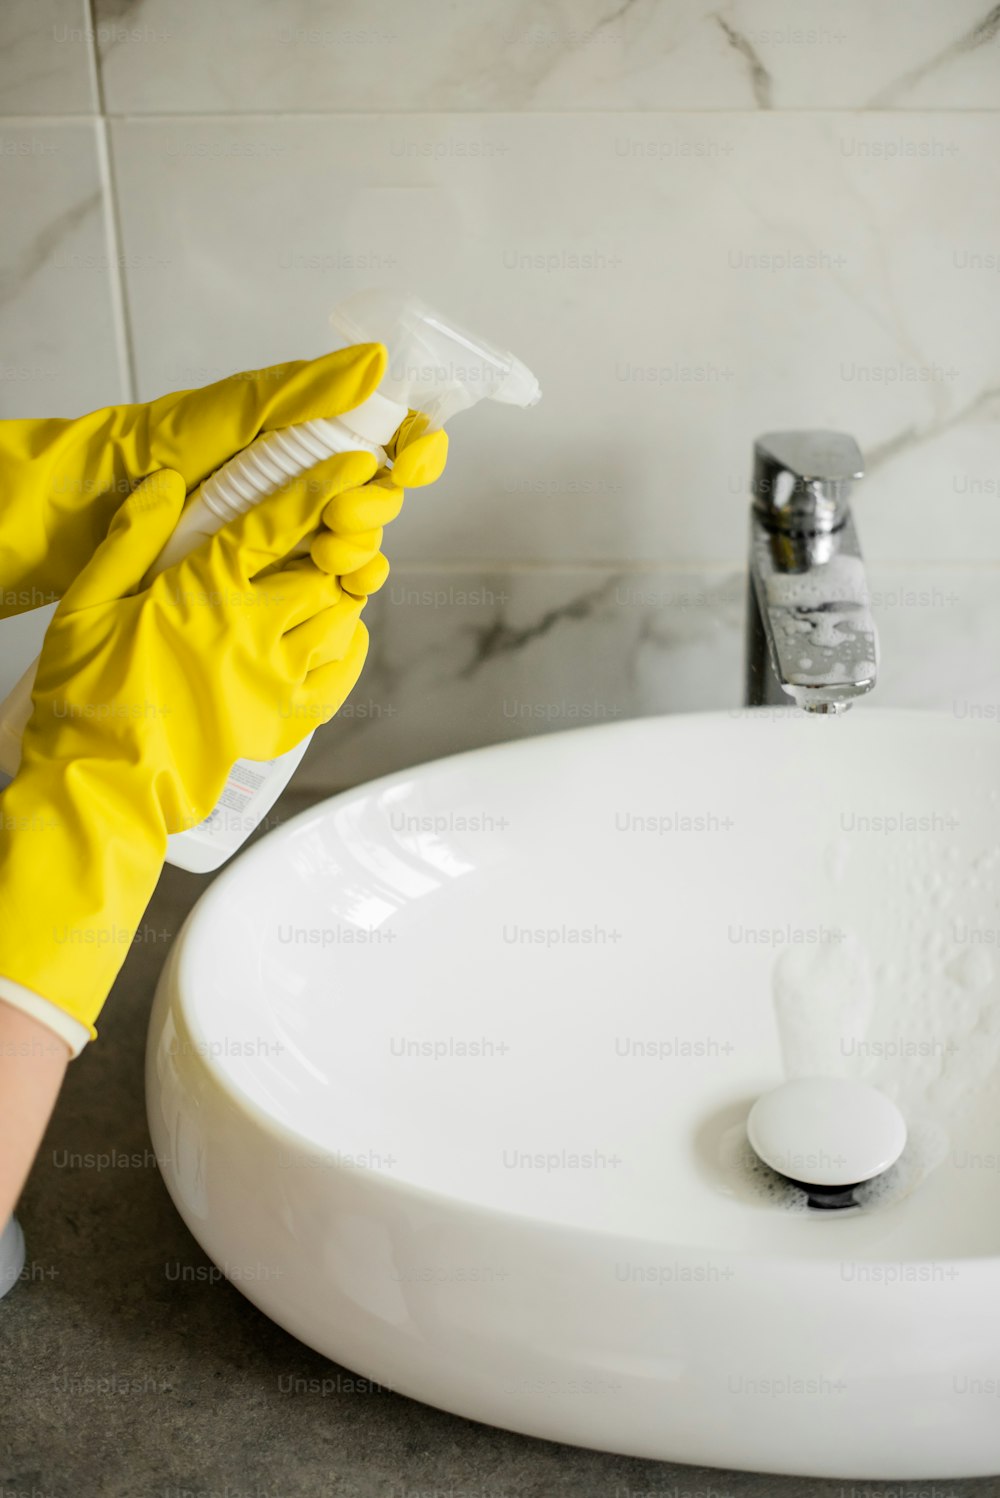 Three black and brown bathroom cleaning tools photo – Free Cleaning Image  on Unsplash